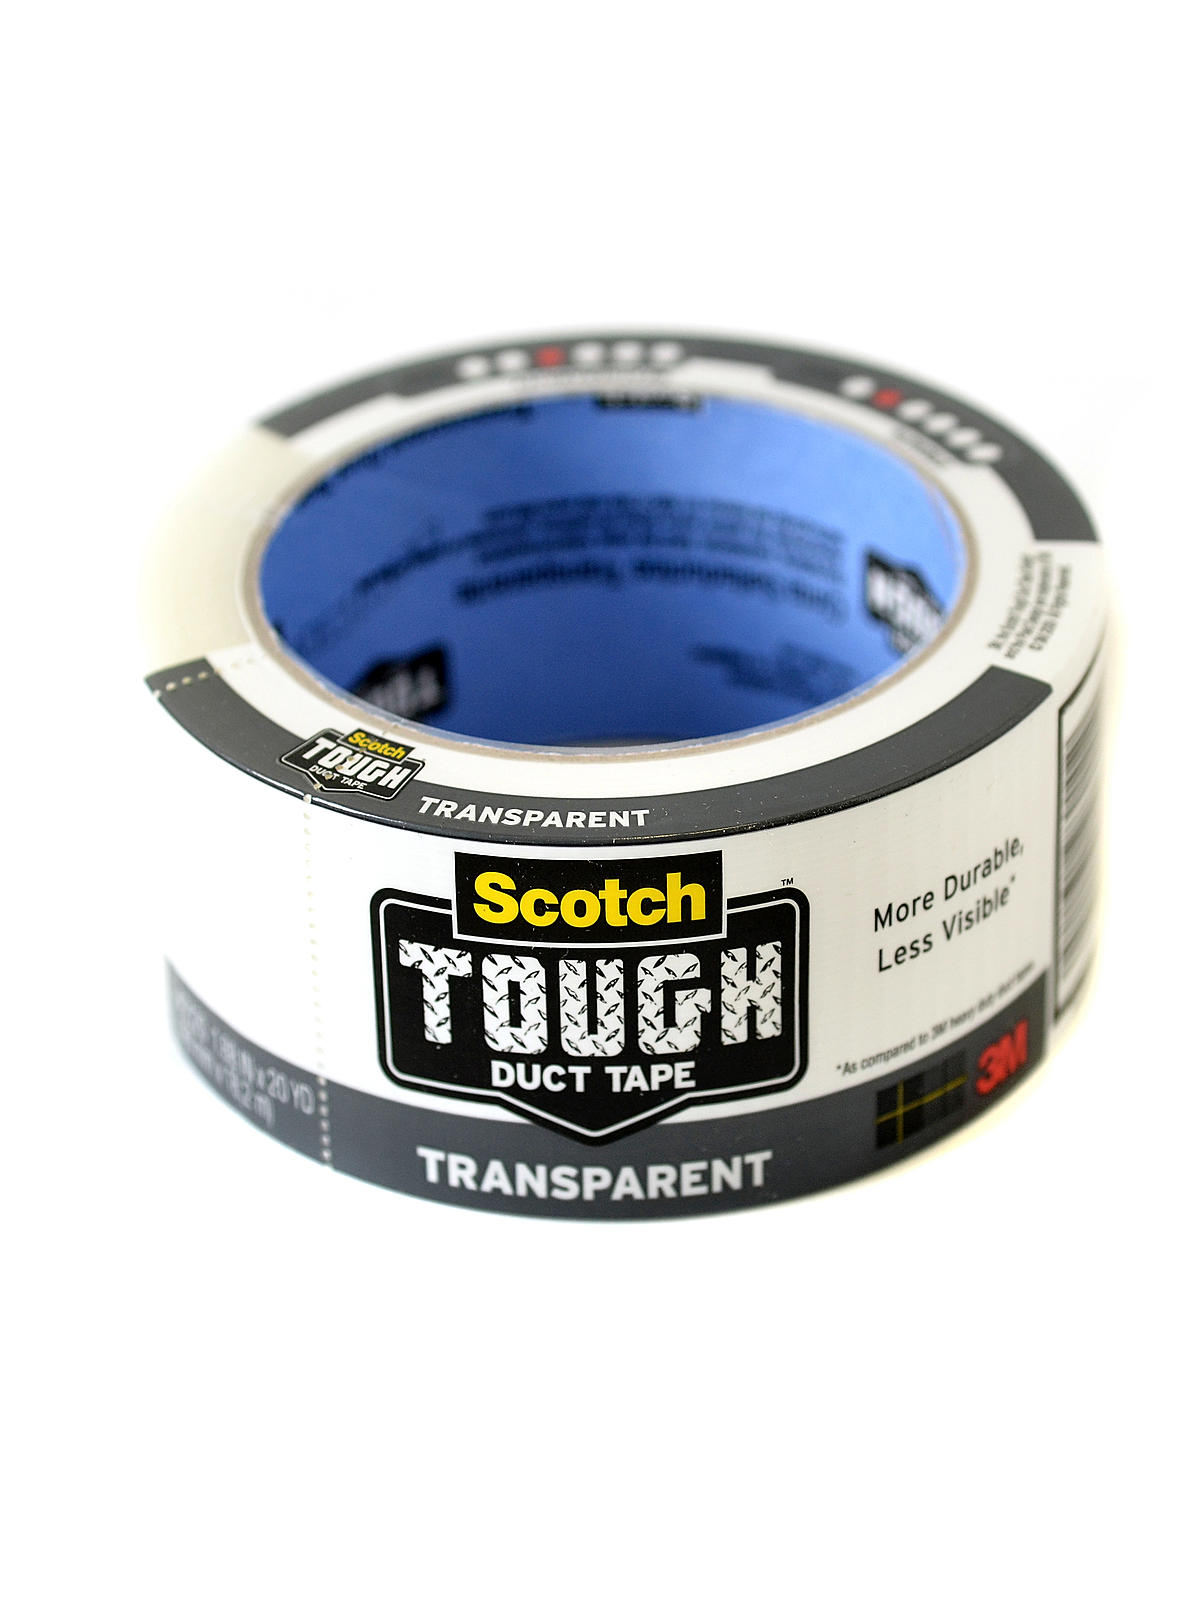 Scotch Transparent Duct Tape 1.88 In. X 20 Yd. Roll